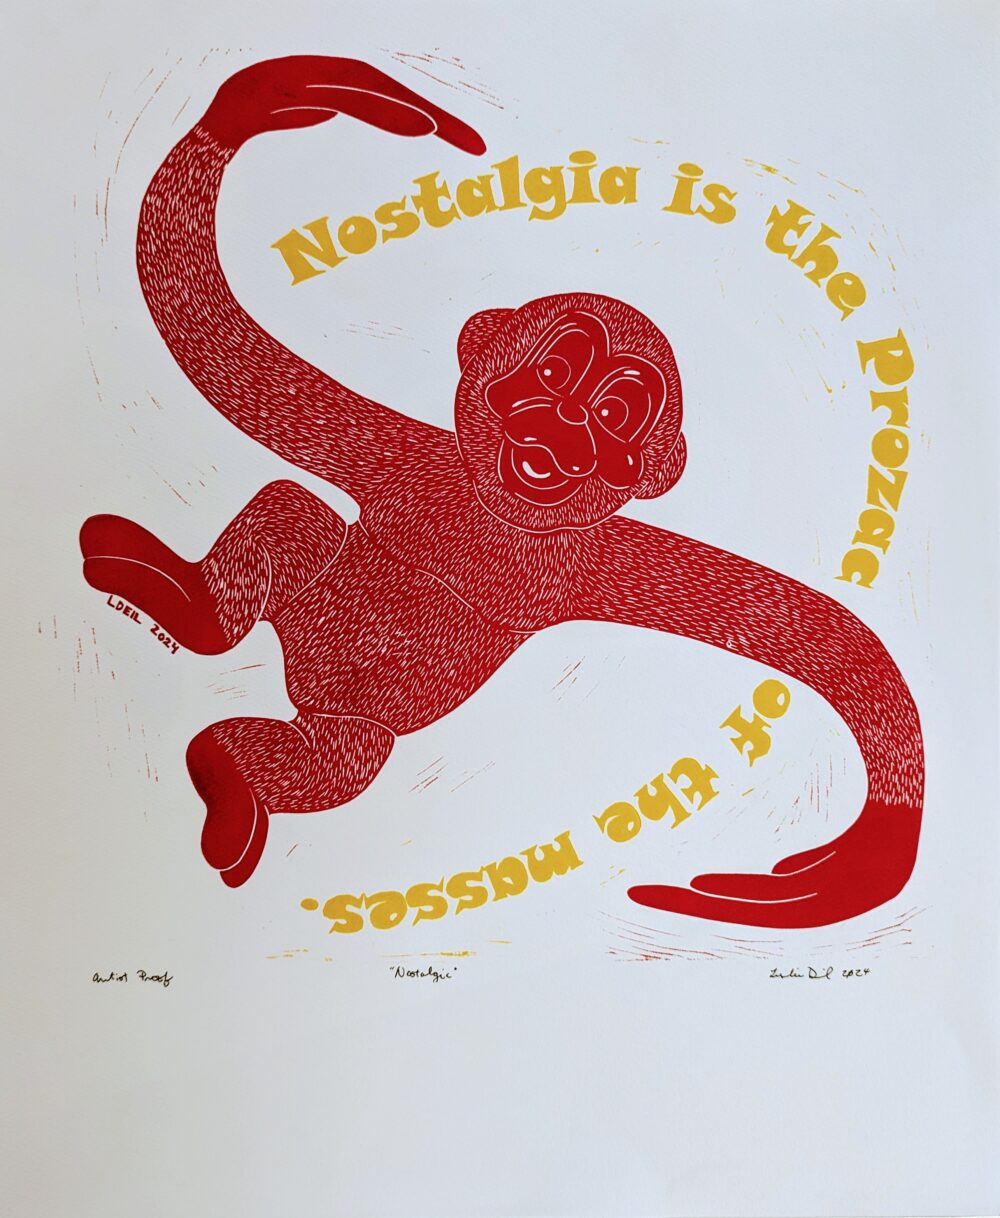 "Nostalgia"- Limited Edition Linocut Print by Artist Leslie Deil. Image is red monkey from the game 'Barrel of Monkeys' with yellow text "Nostalgia is the Prozac of the masses." Image is 18 inches by 18 inches and the paper size is 20 by 24 inches.